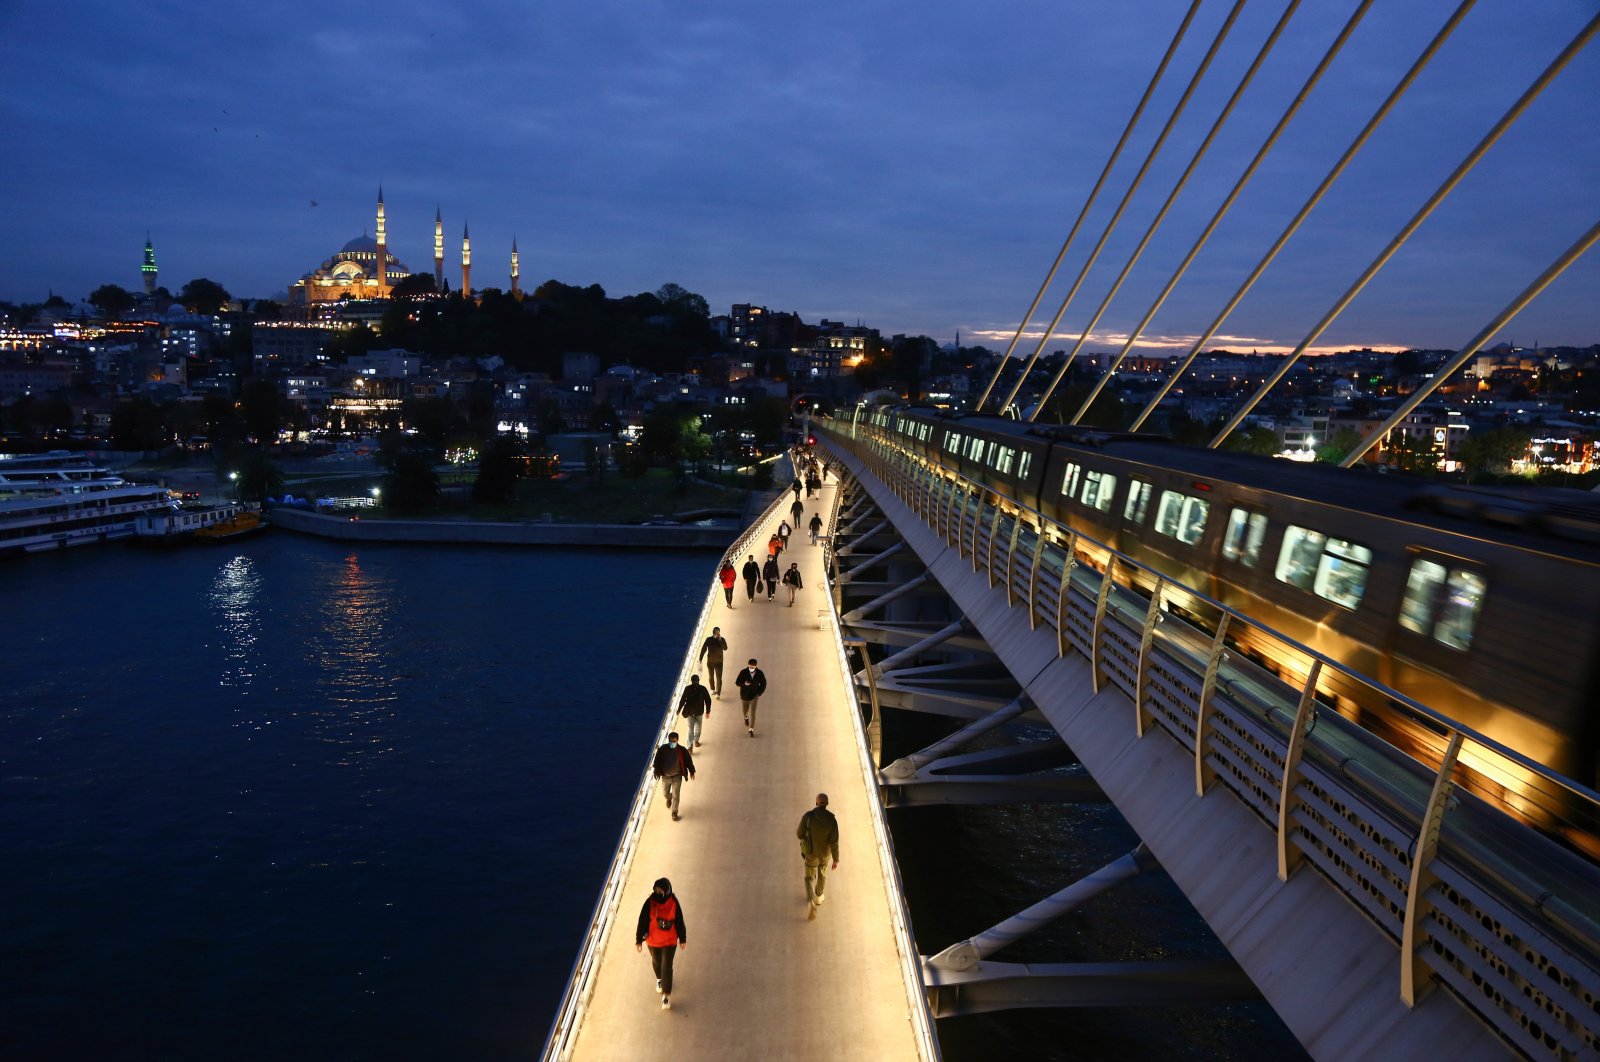 People are seen walking along the Golden Horn Metro bridge, with the Süleymaniye Mosque appearing in the background at sunset, Istanbul, Turkey, Oct. 3, 2021. (Photo by Getty Images)